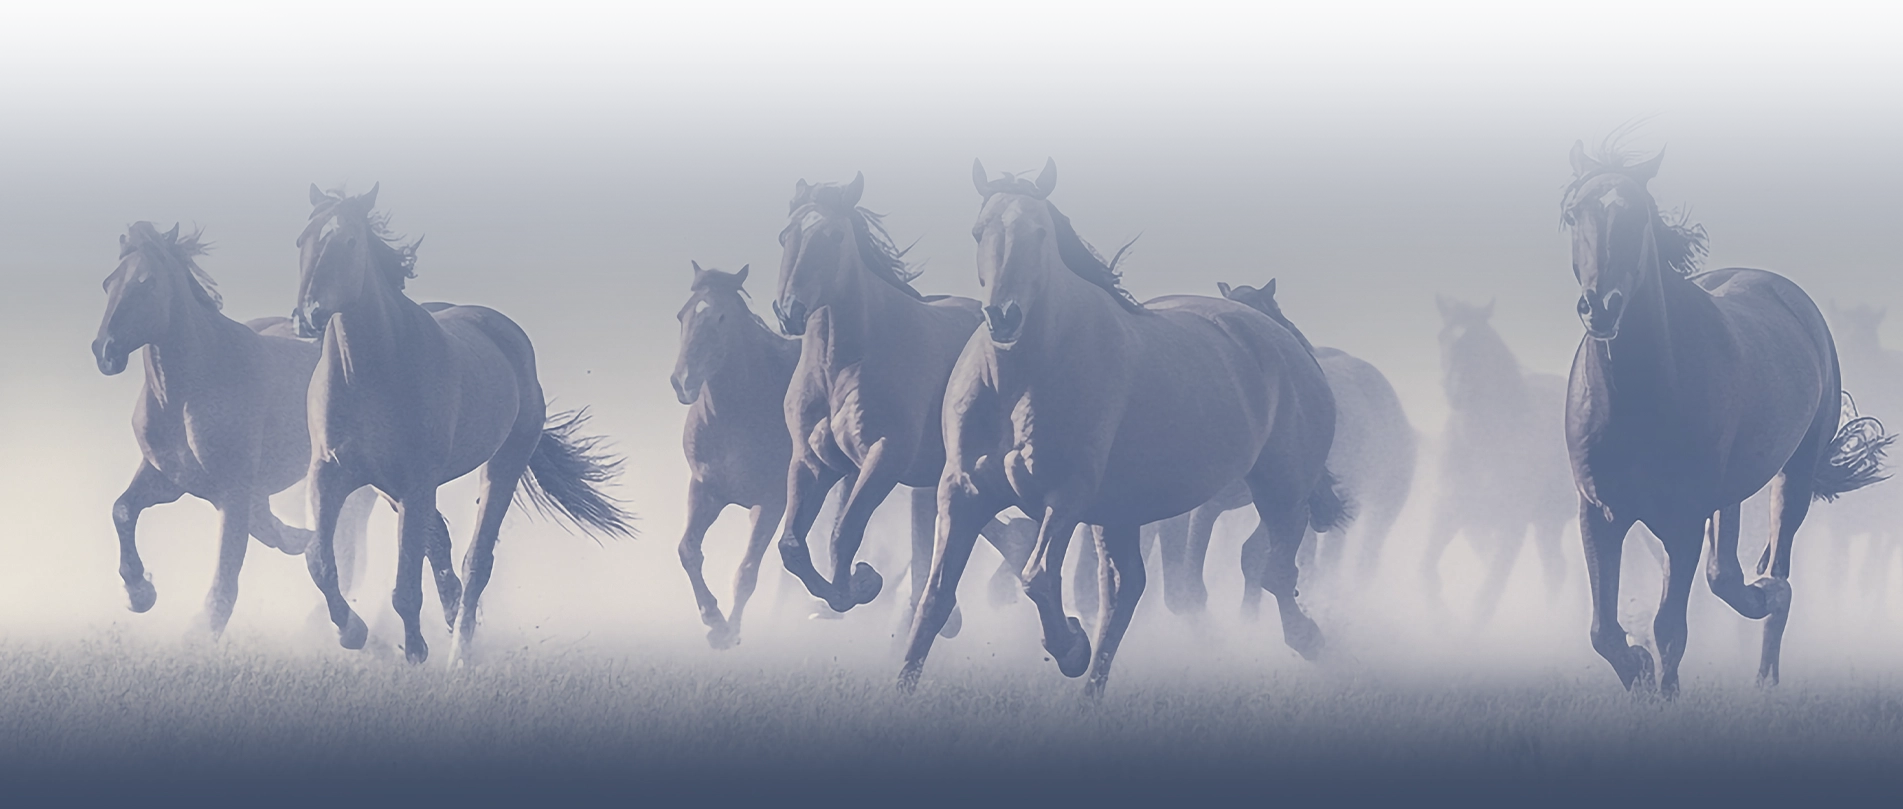 Wild horses running towards the viewer in a wide open field. There is a blue overlay on top of the image.